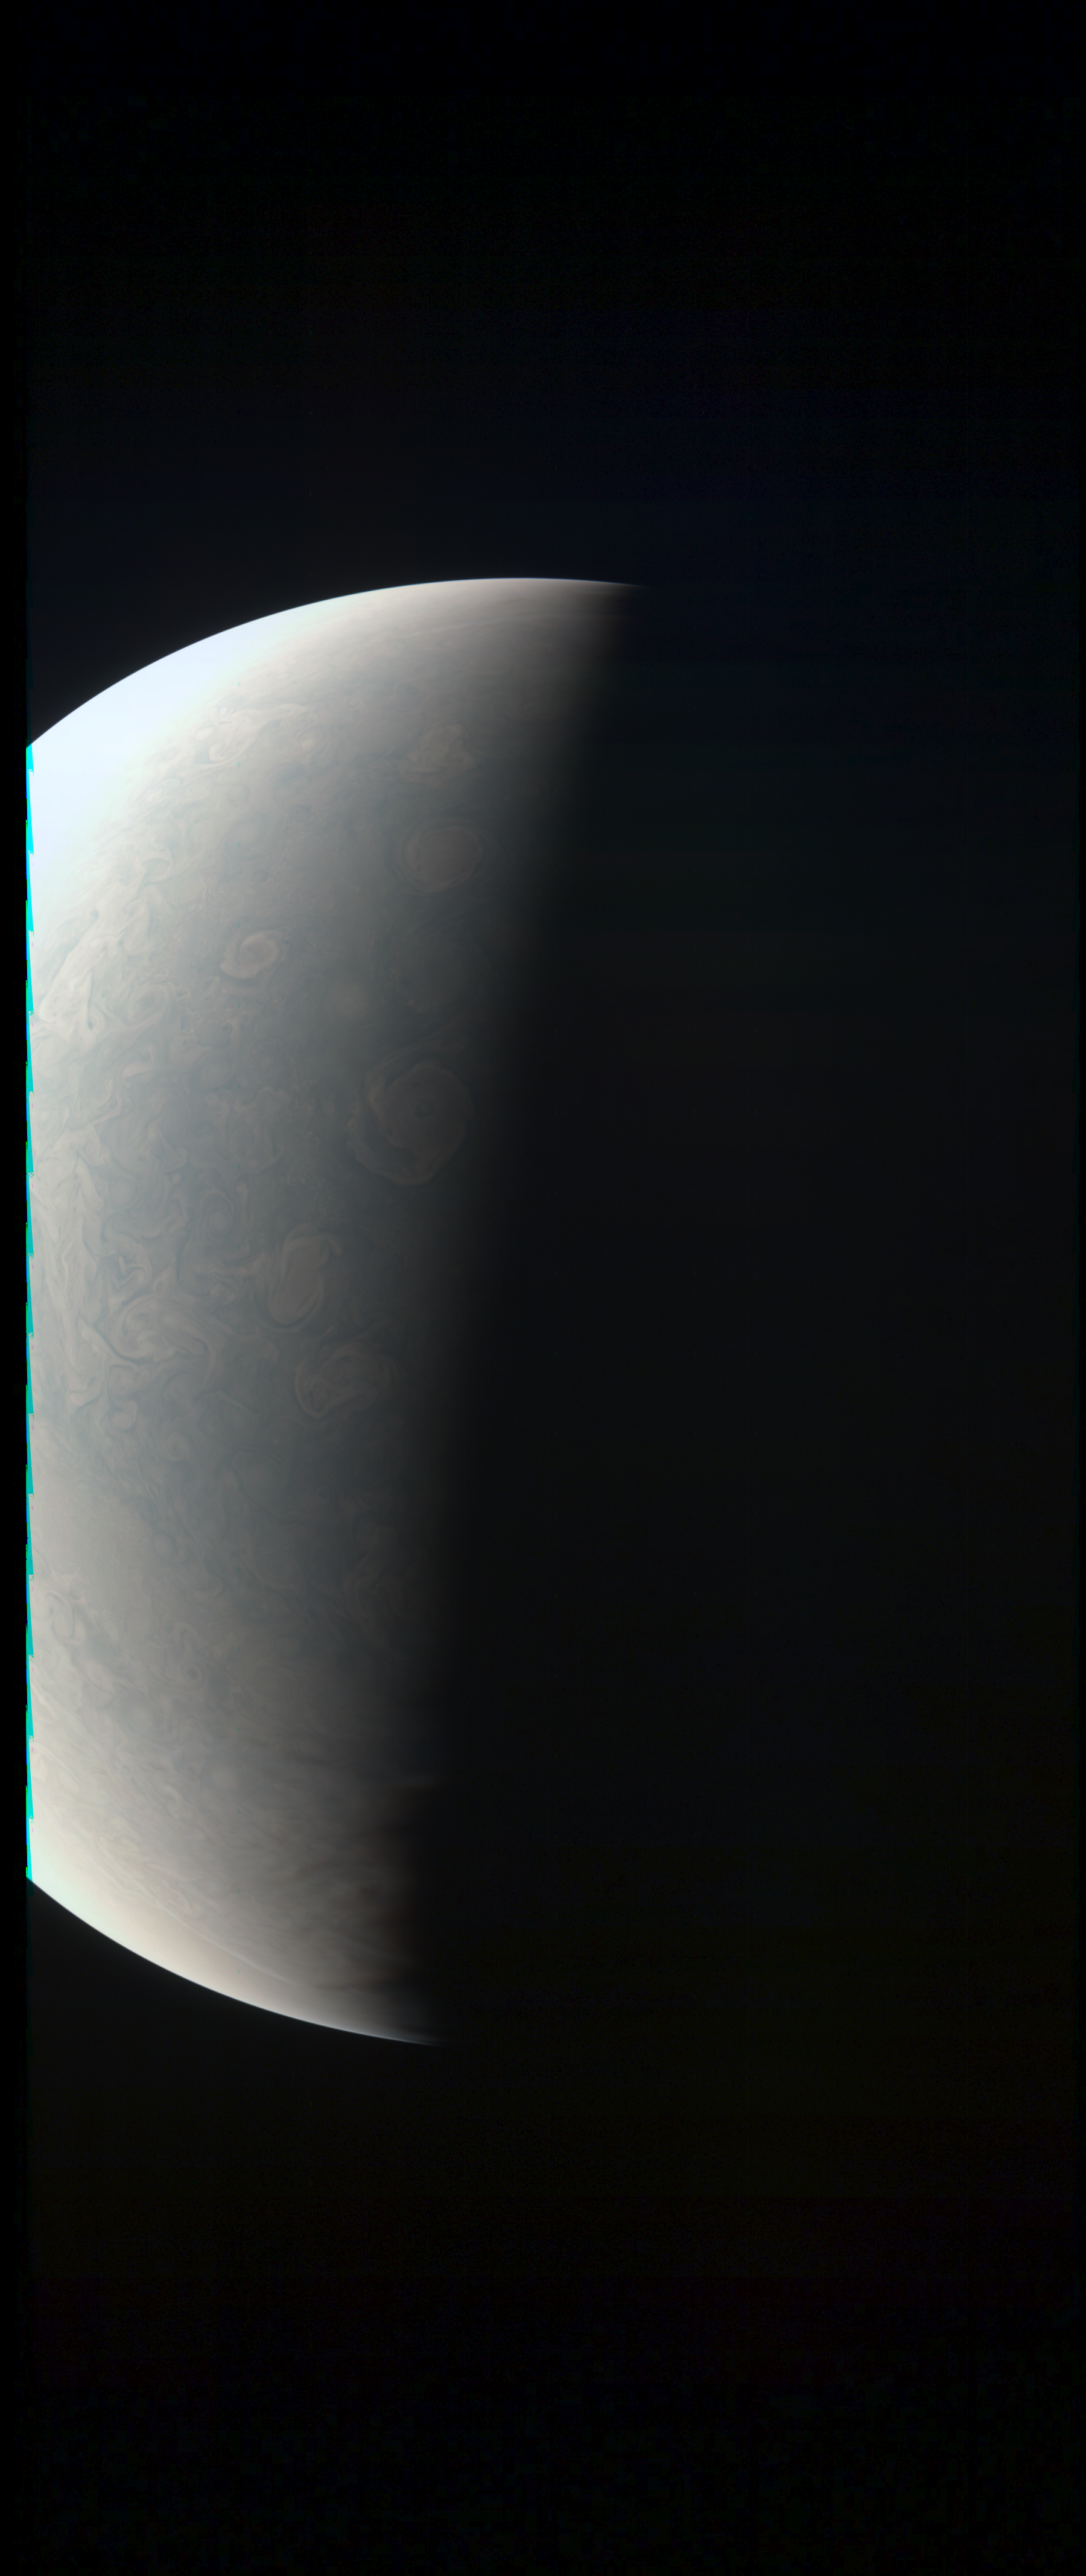 JNCE_2019043_18C00022_V01-raw_proc_hollow_sphere_c_pj_out.BMP_thumbnail_.png